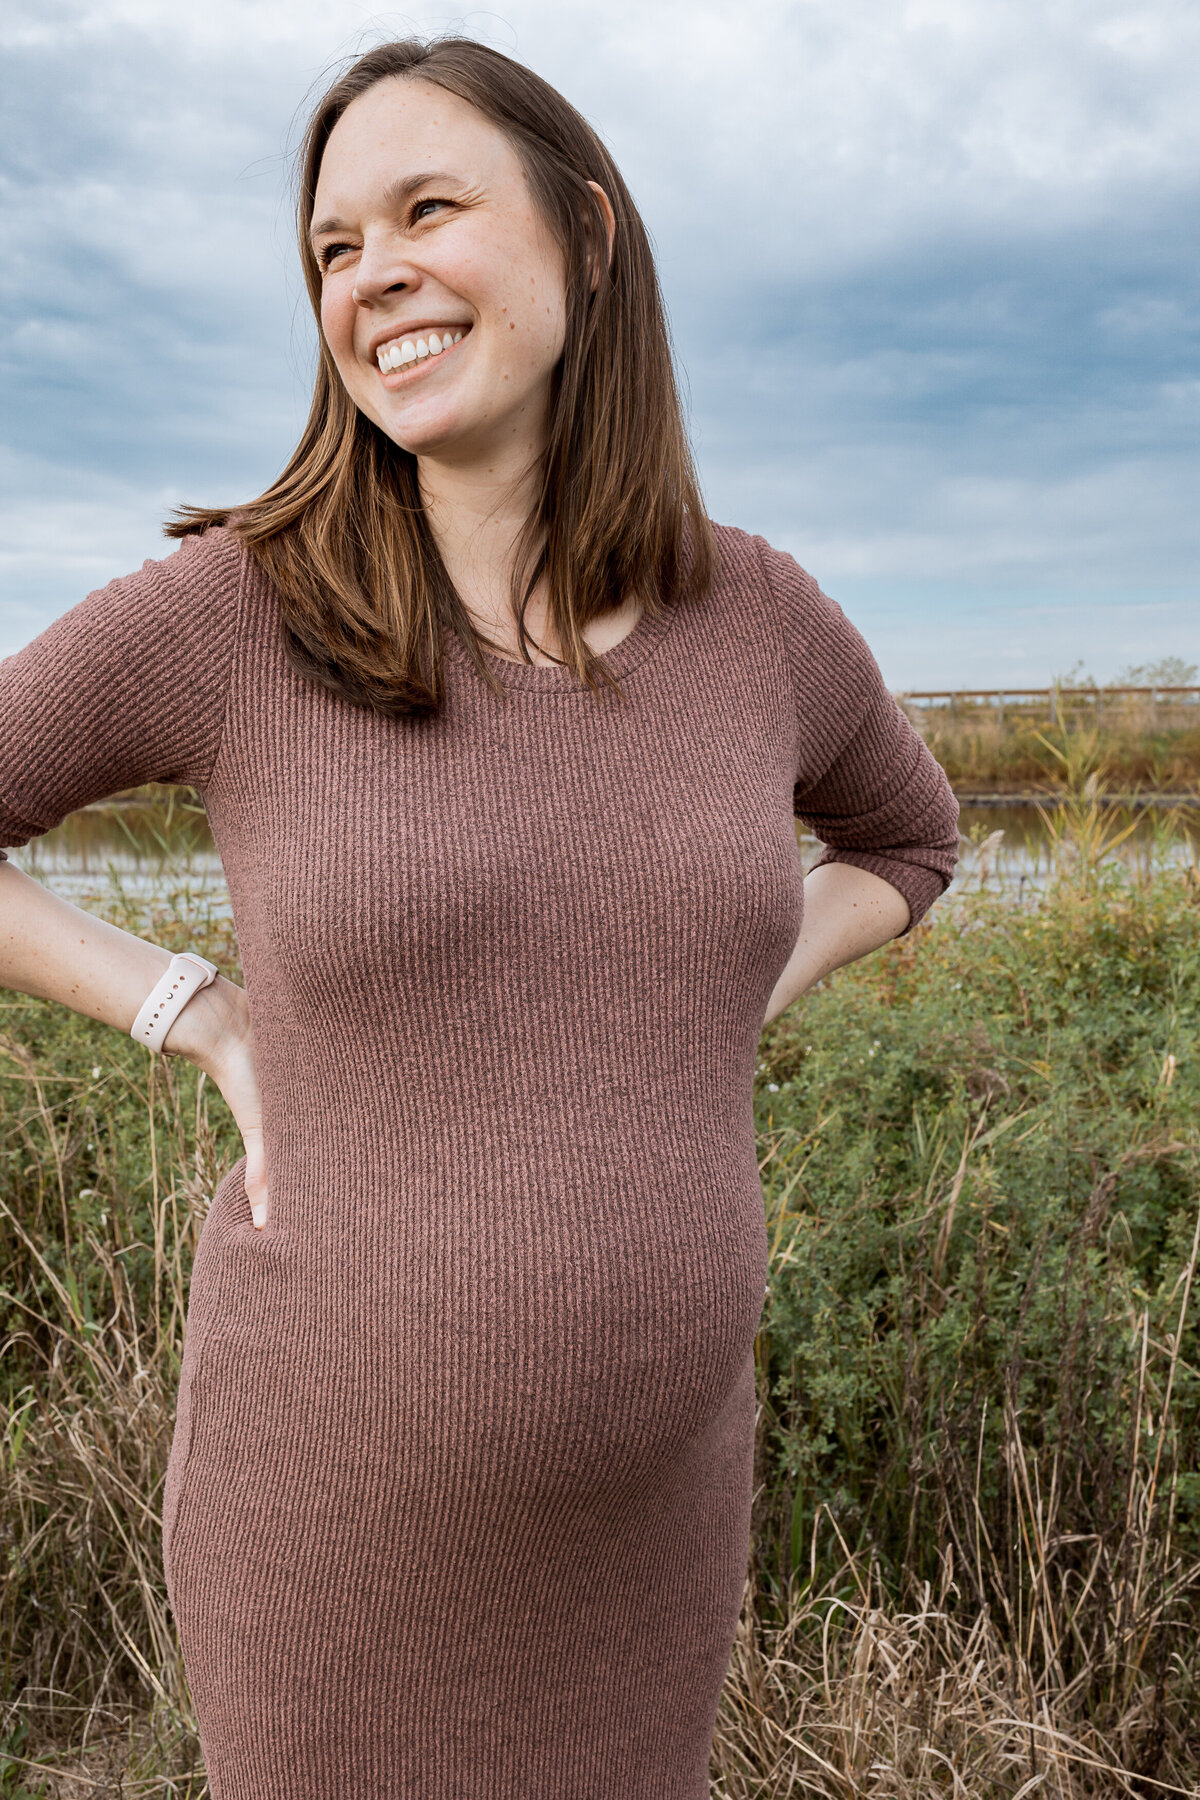 Maternity Photographer, an expectant woman smiles near the edge of a lake